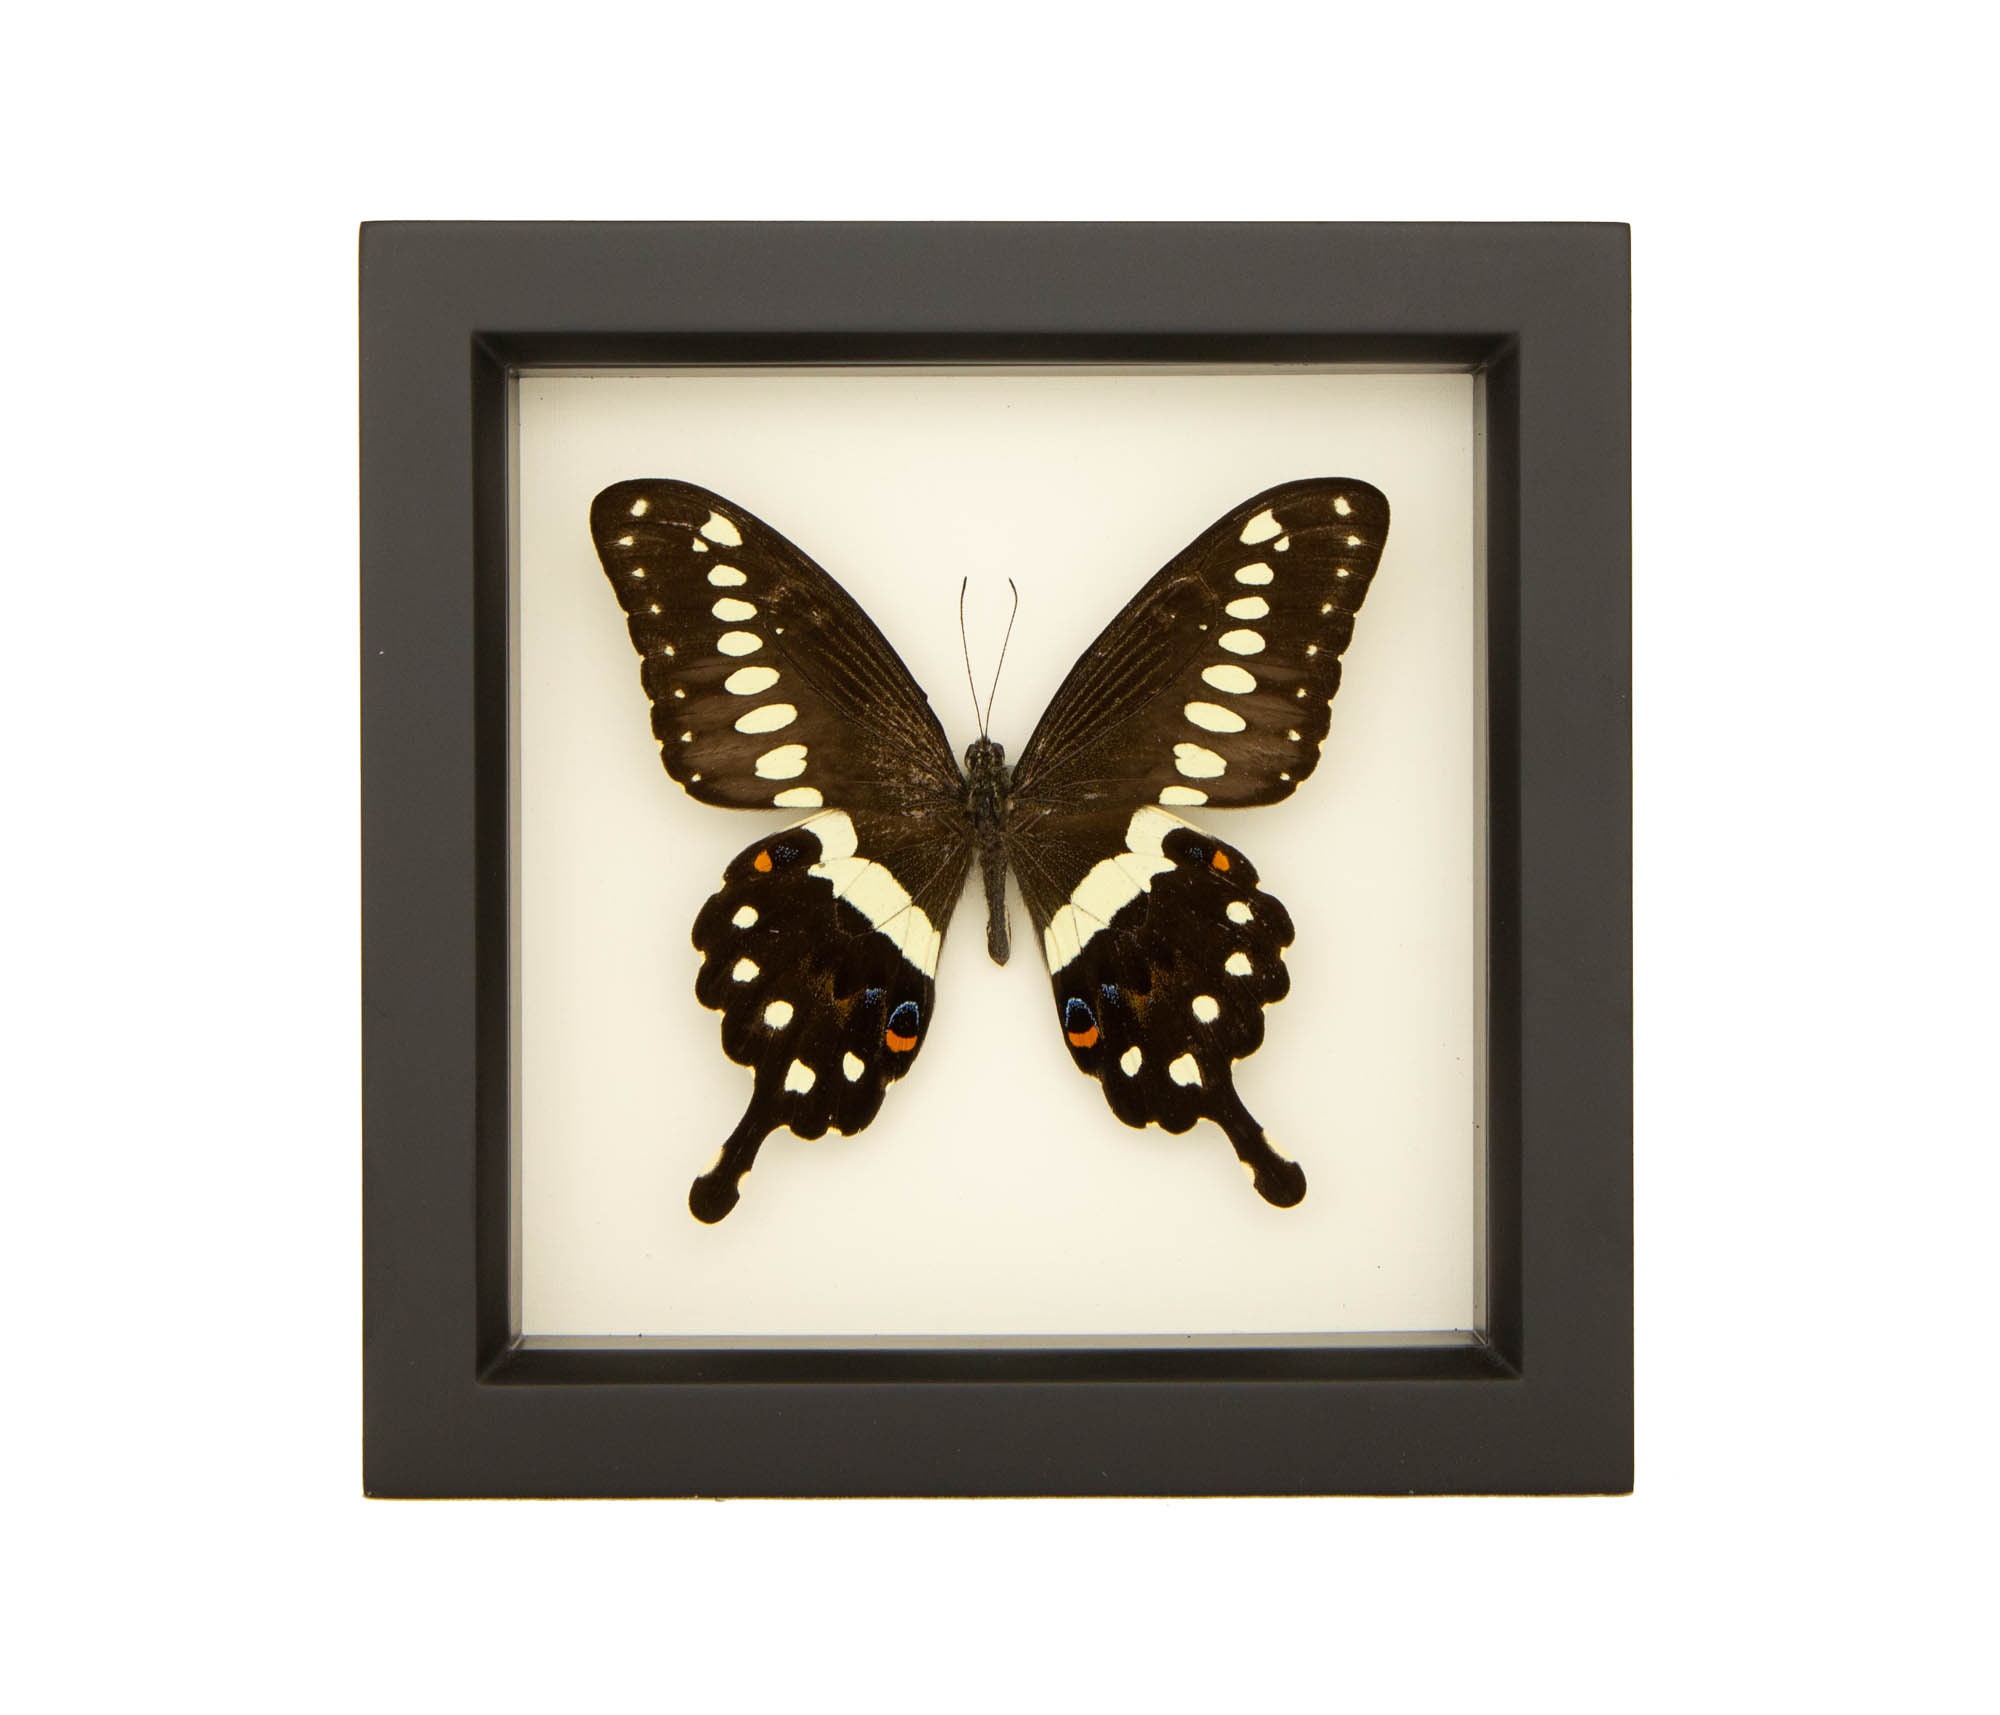 Framed Lormiers Swallowtail Butterfly Art Shadowbox | Etsy